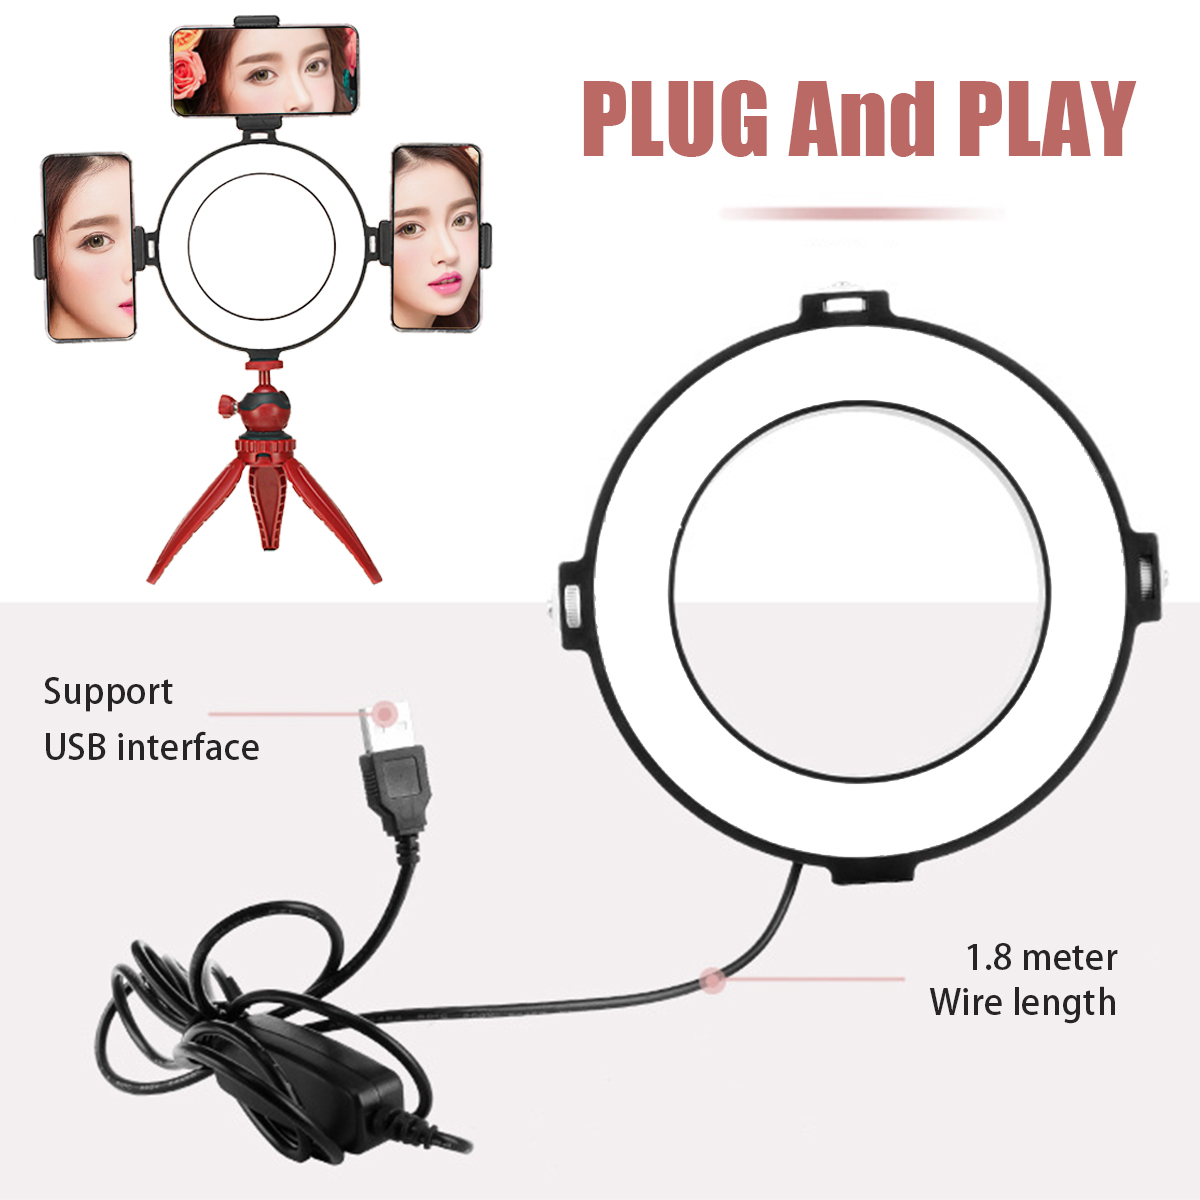 LED Ring Light Studio Photo Video Dimmable Lamp